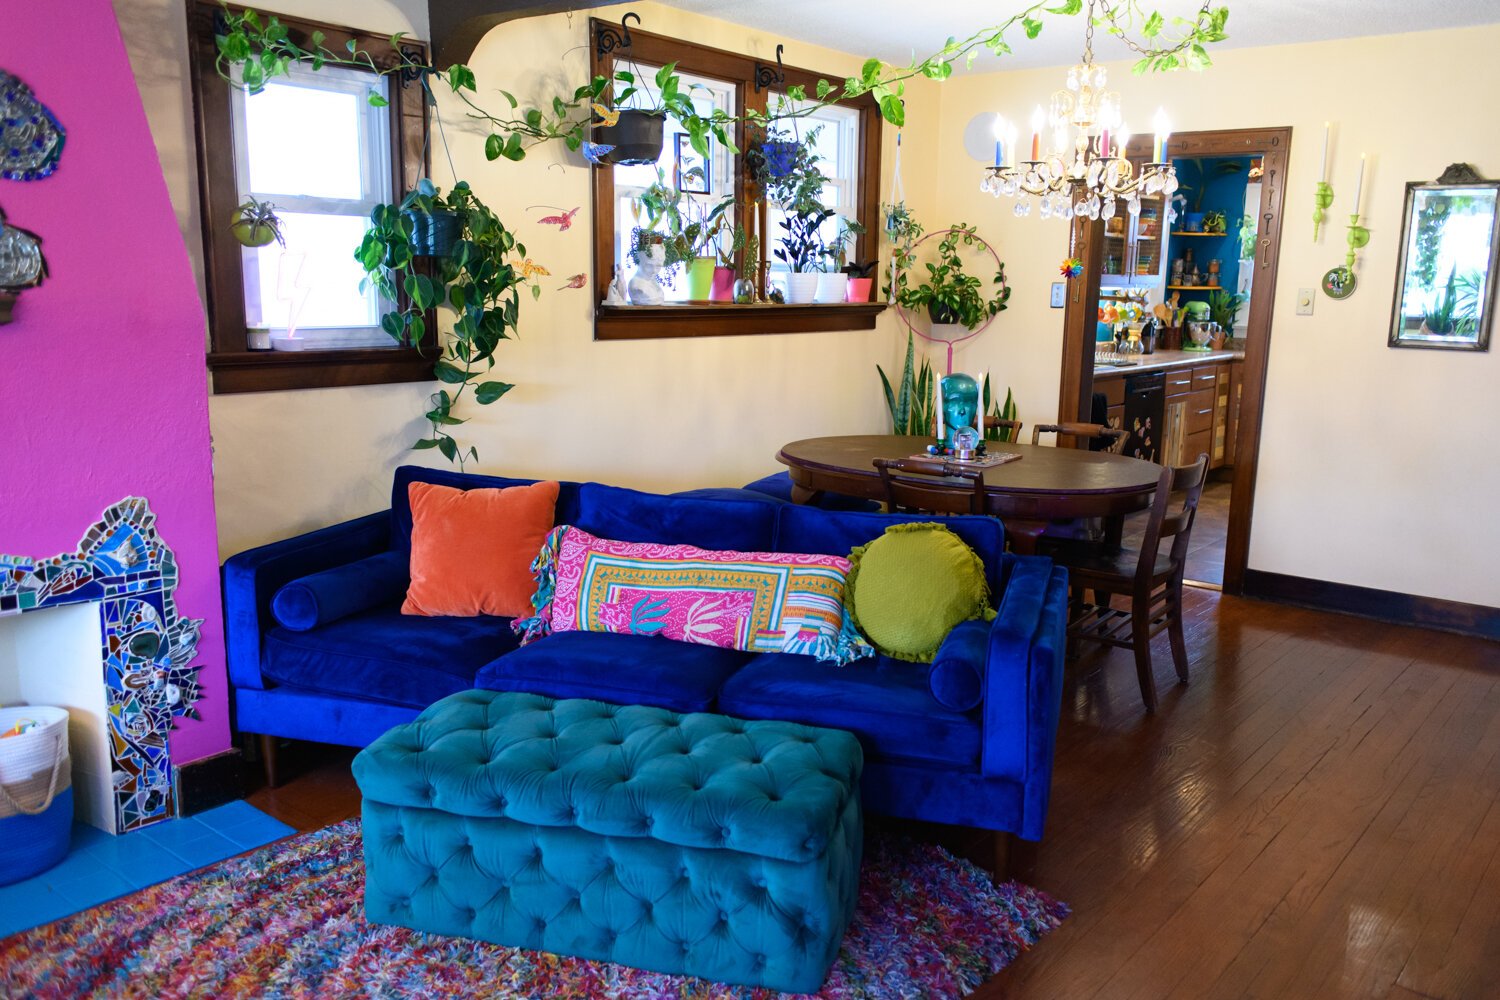 The living room and dining room areas feature a lot of color.